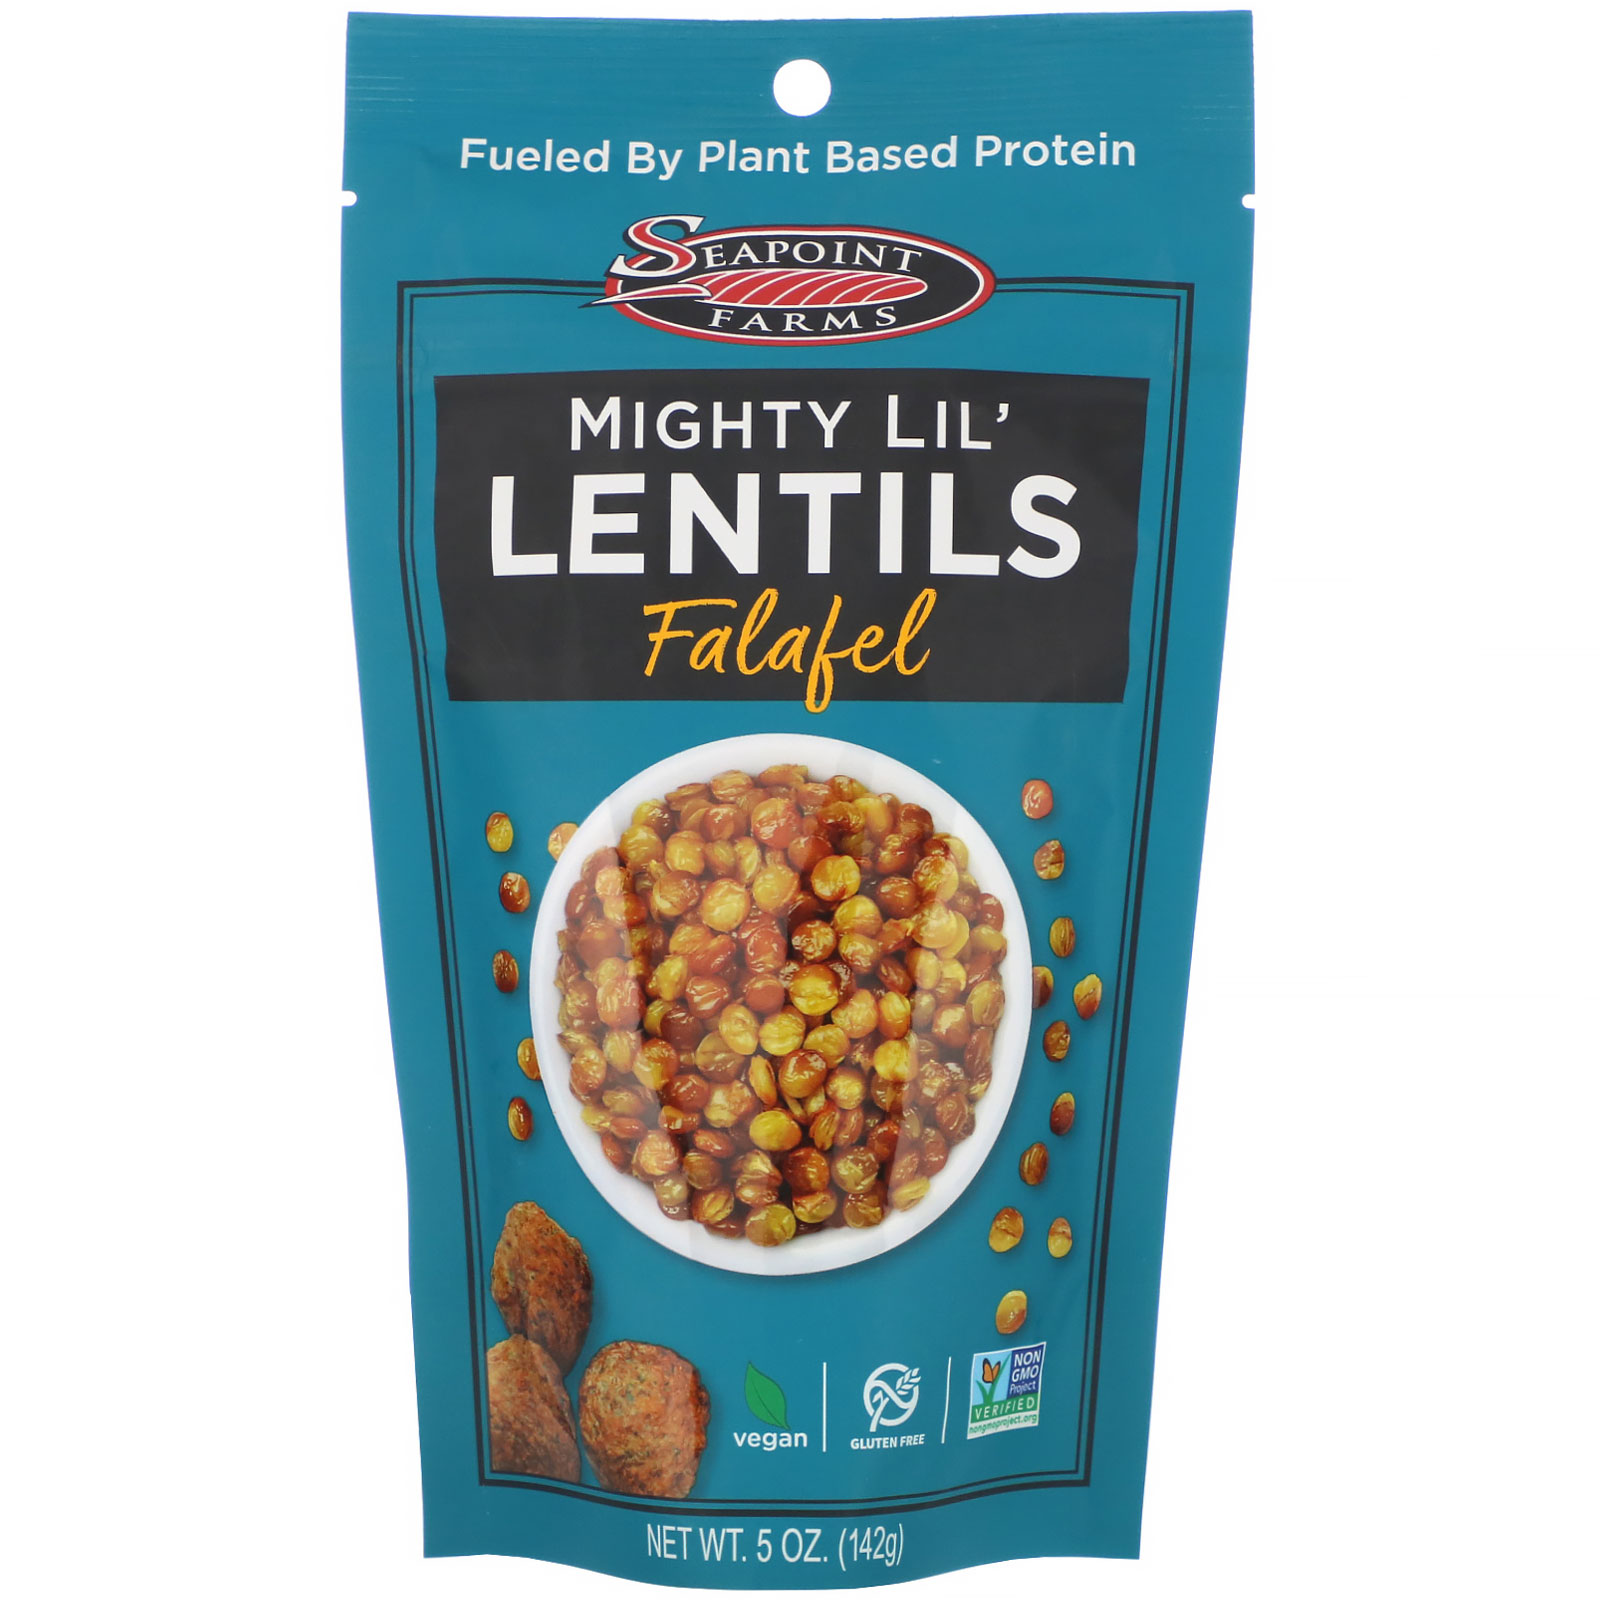 Seapoint Farms, Mighty Lil' Lentils（小さい優れモノのレンズ豆）、ファラフェル、142g（5オンス）